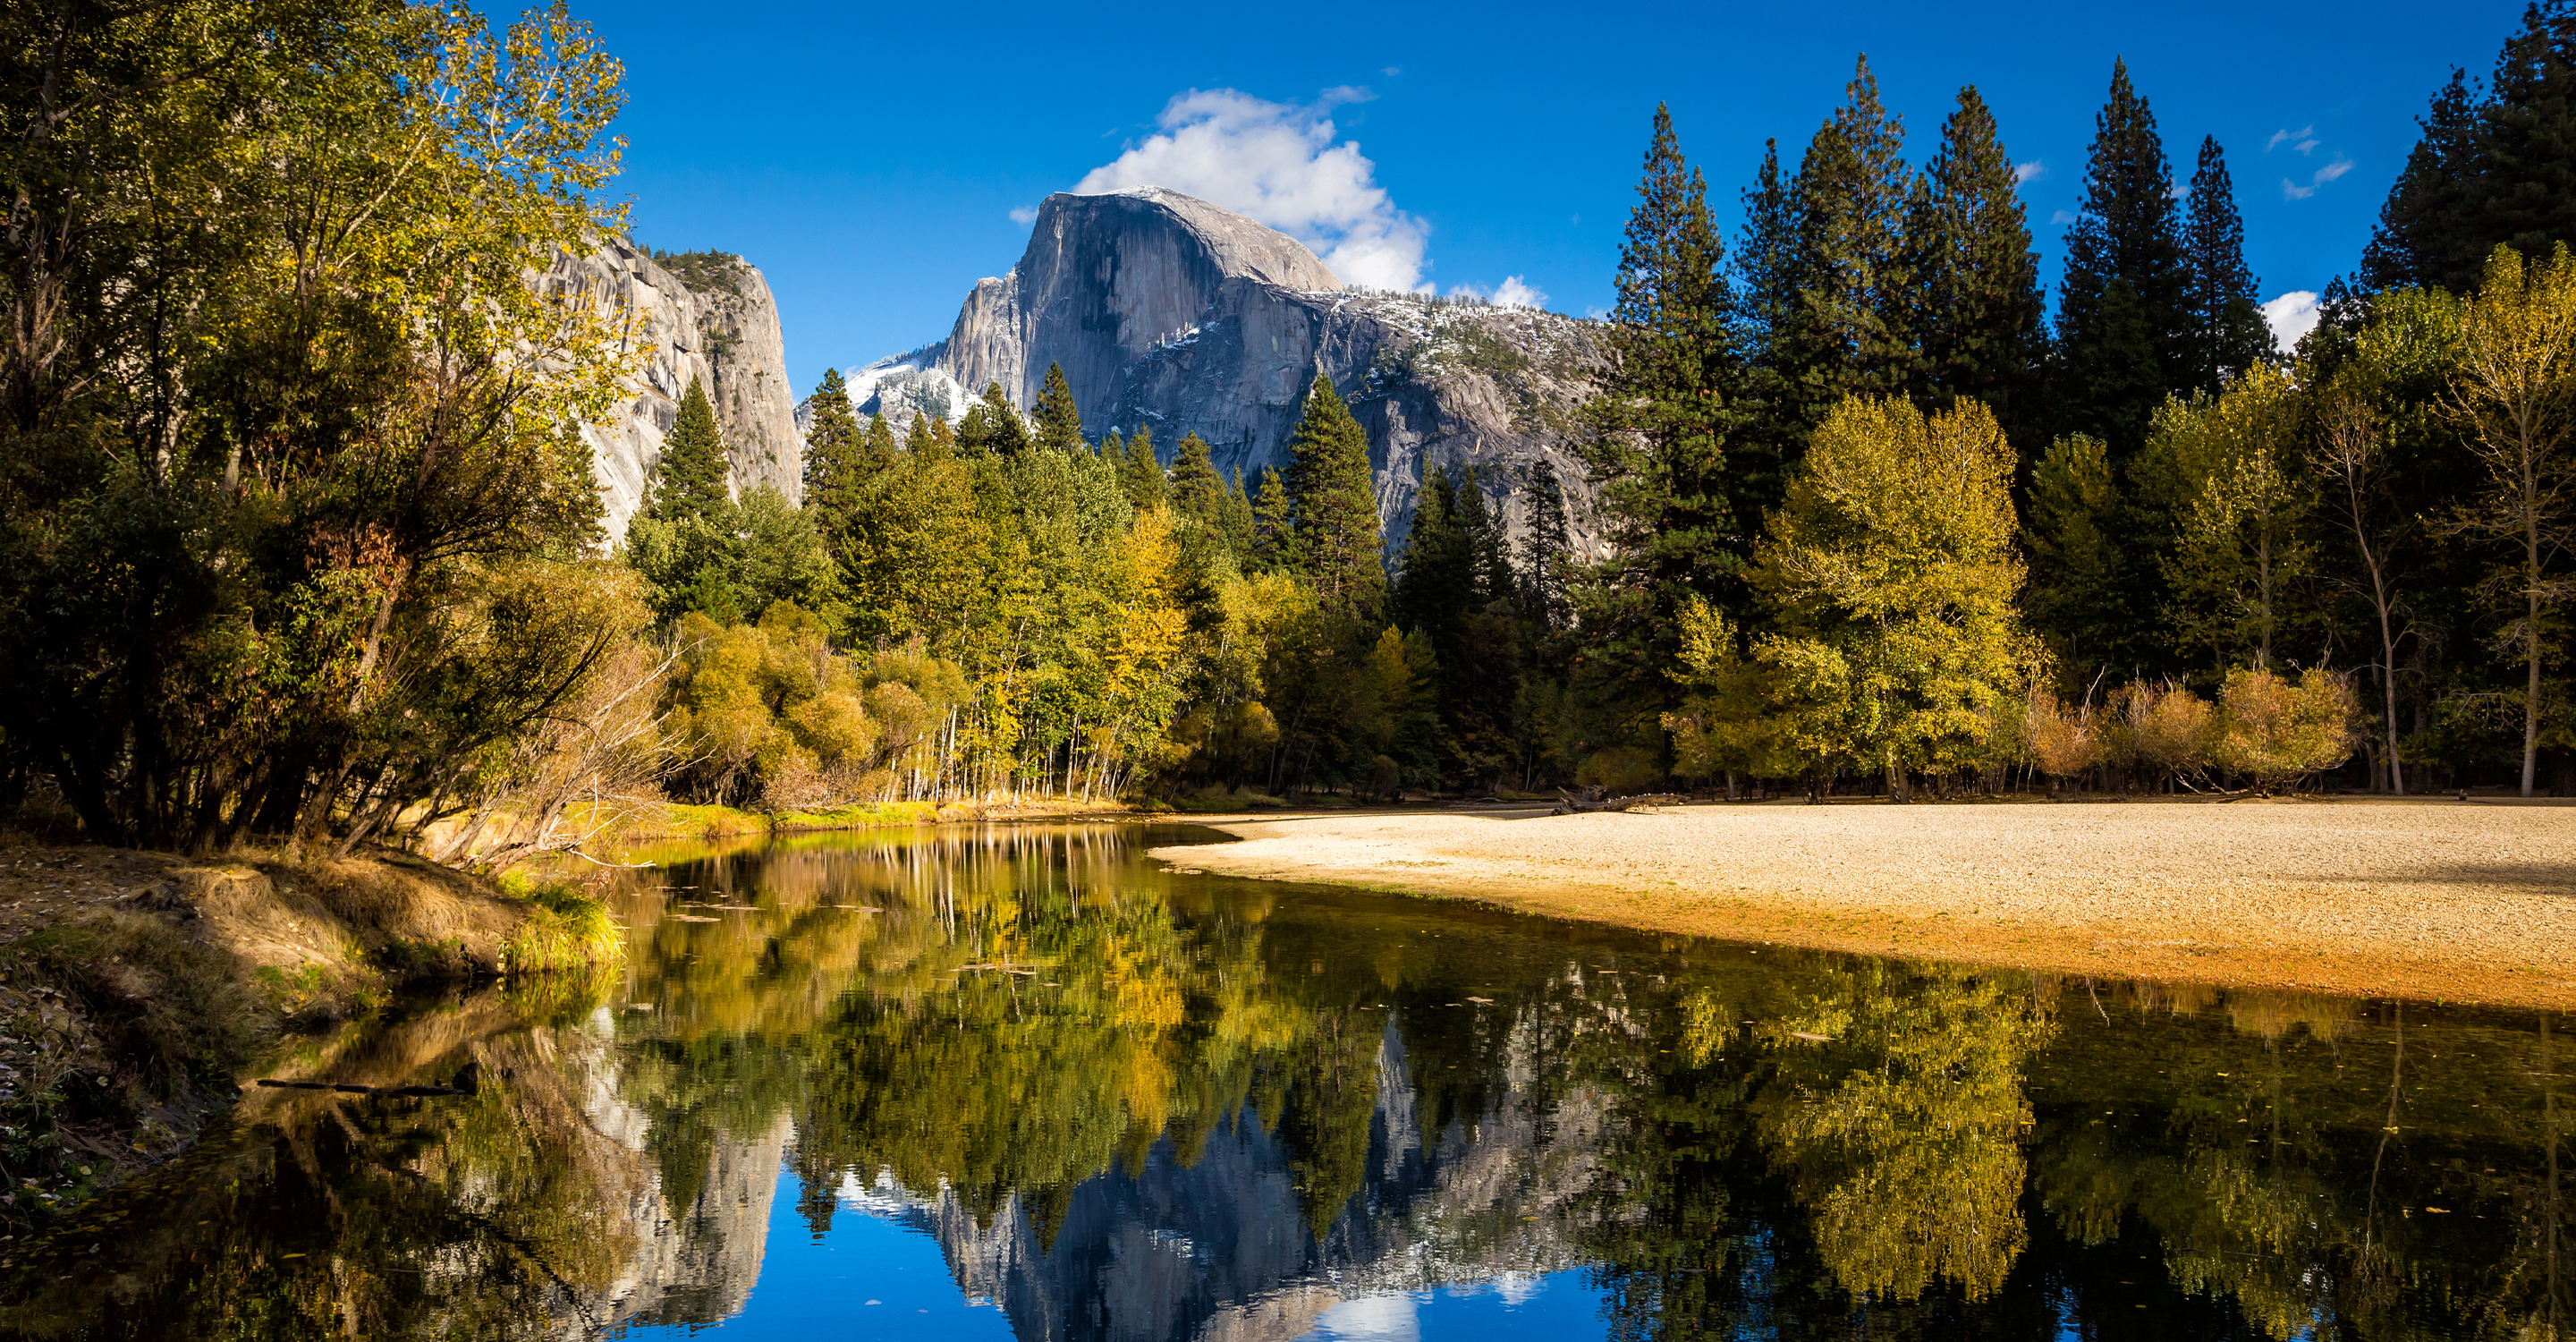 A lake sits in front of Half Dome mountain in Yosemite National Park, California, United States